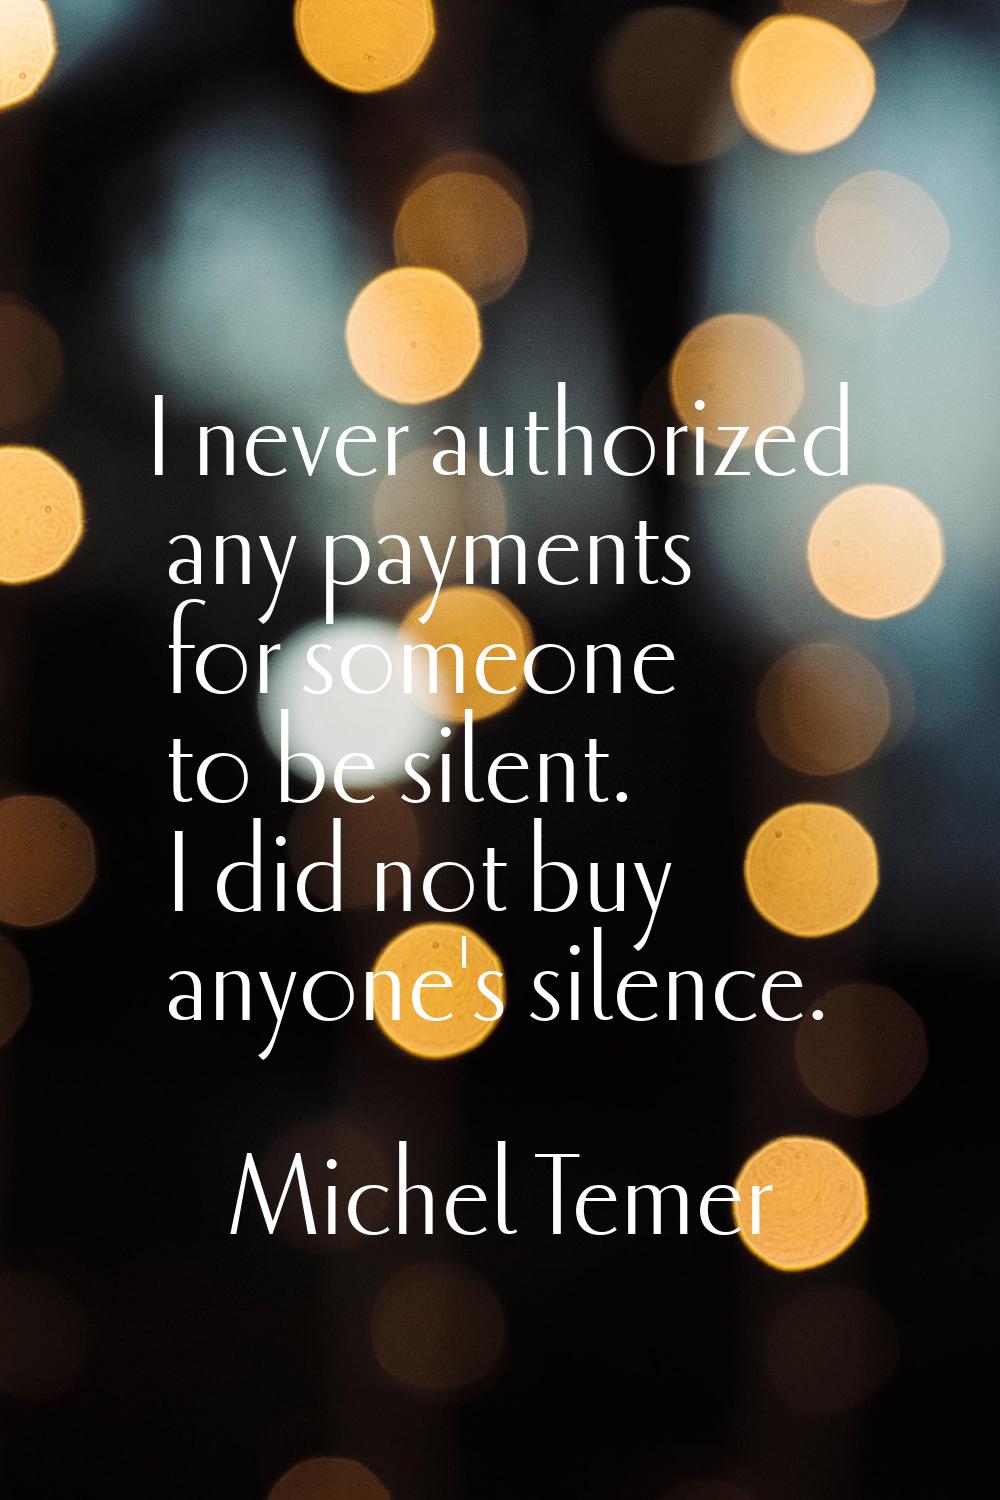 I never authorized any payments for someone to be silent. I did not buy anyone's silence.